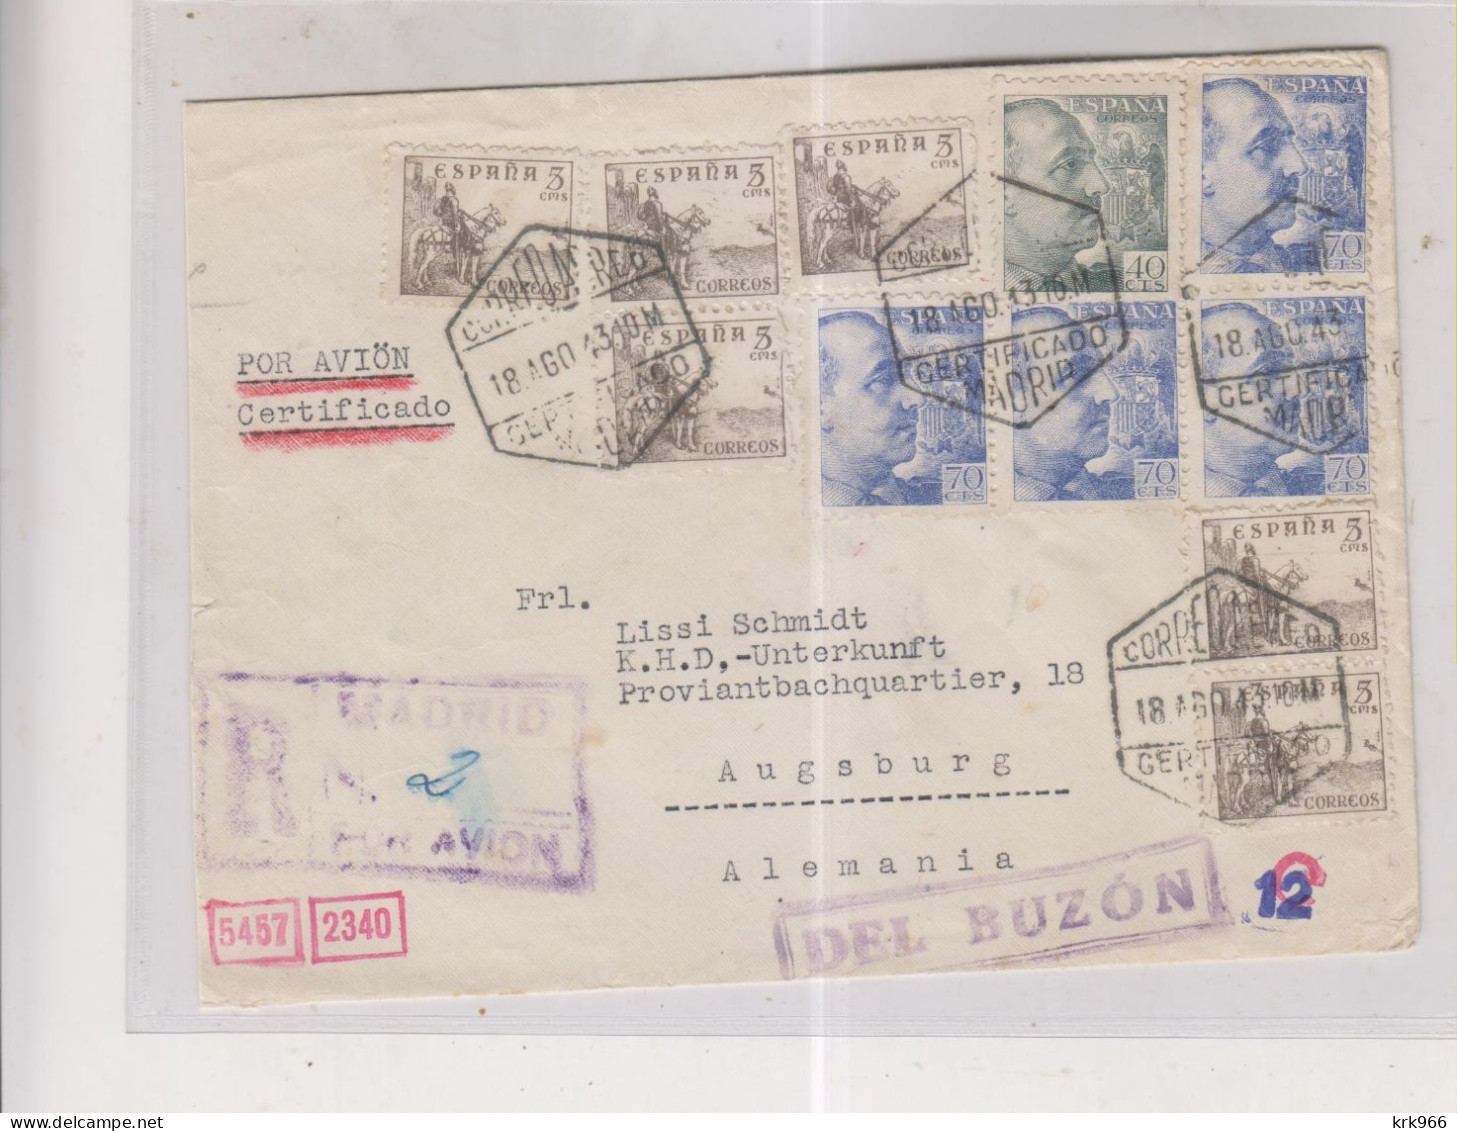 SPAIN MADRID 1943 Censored Registered Airmail Cover To Germany - Briefe U. Dokumente